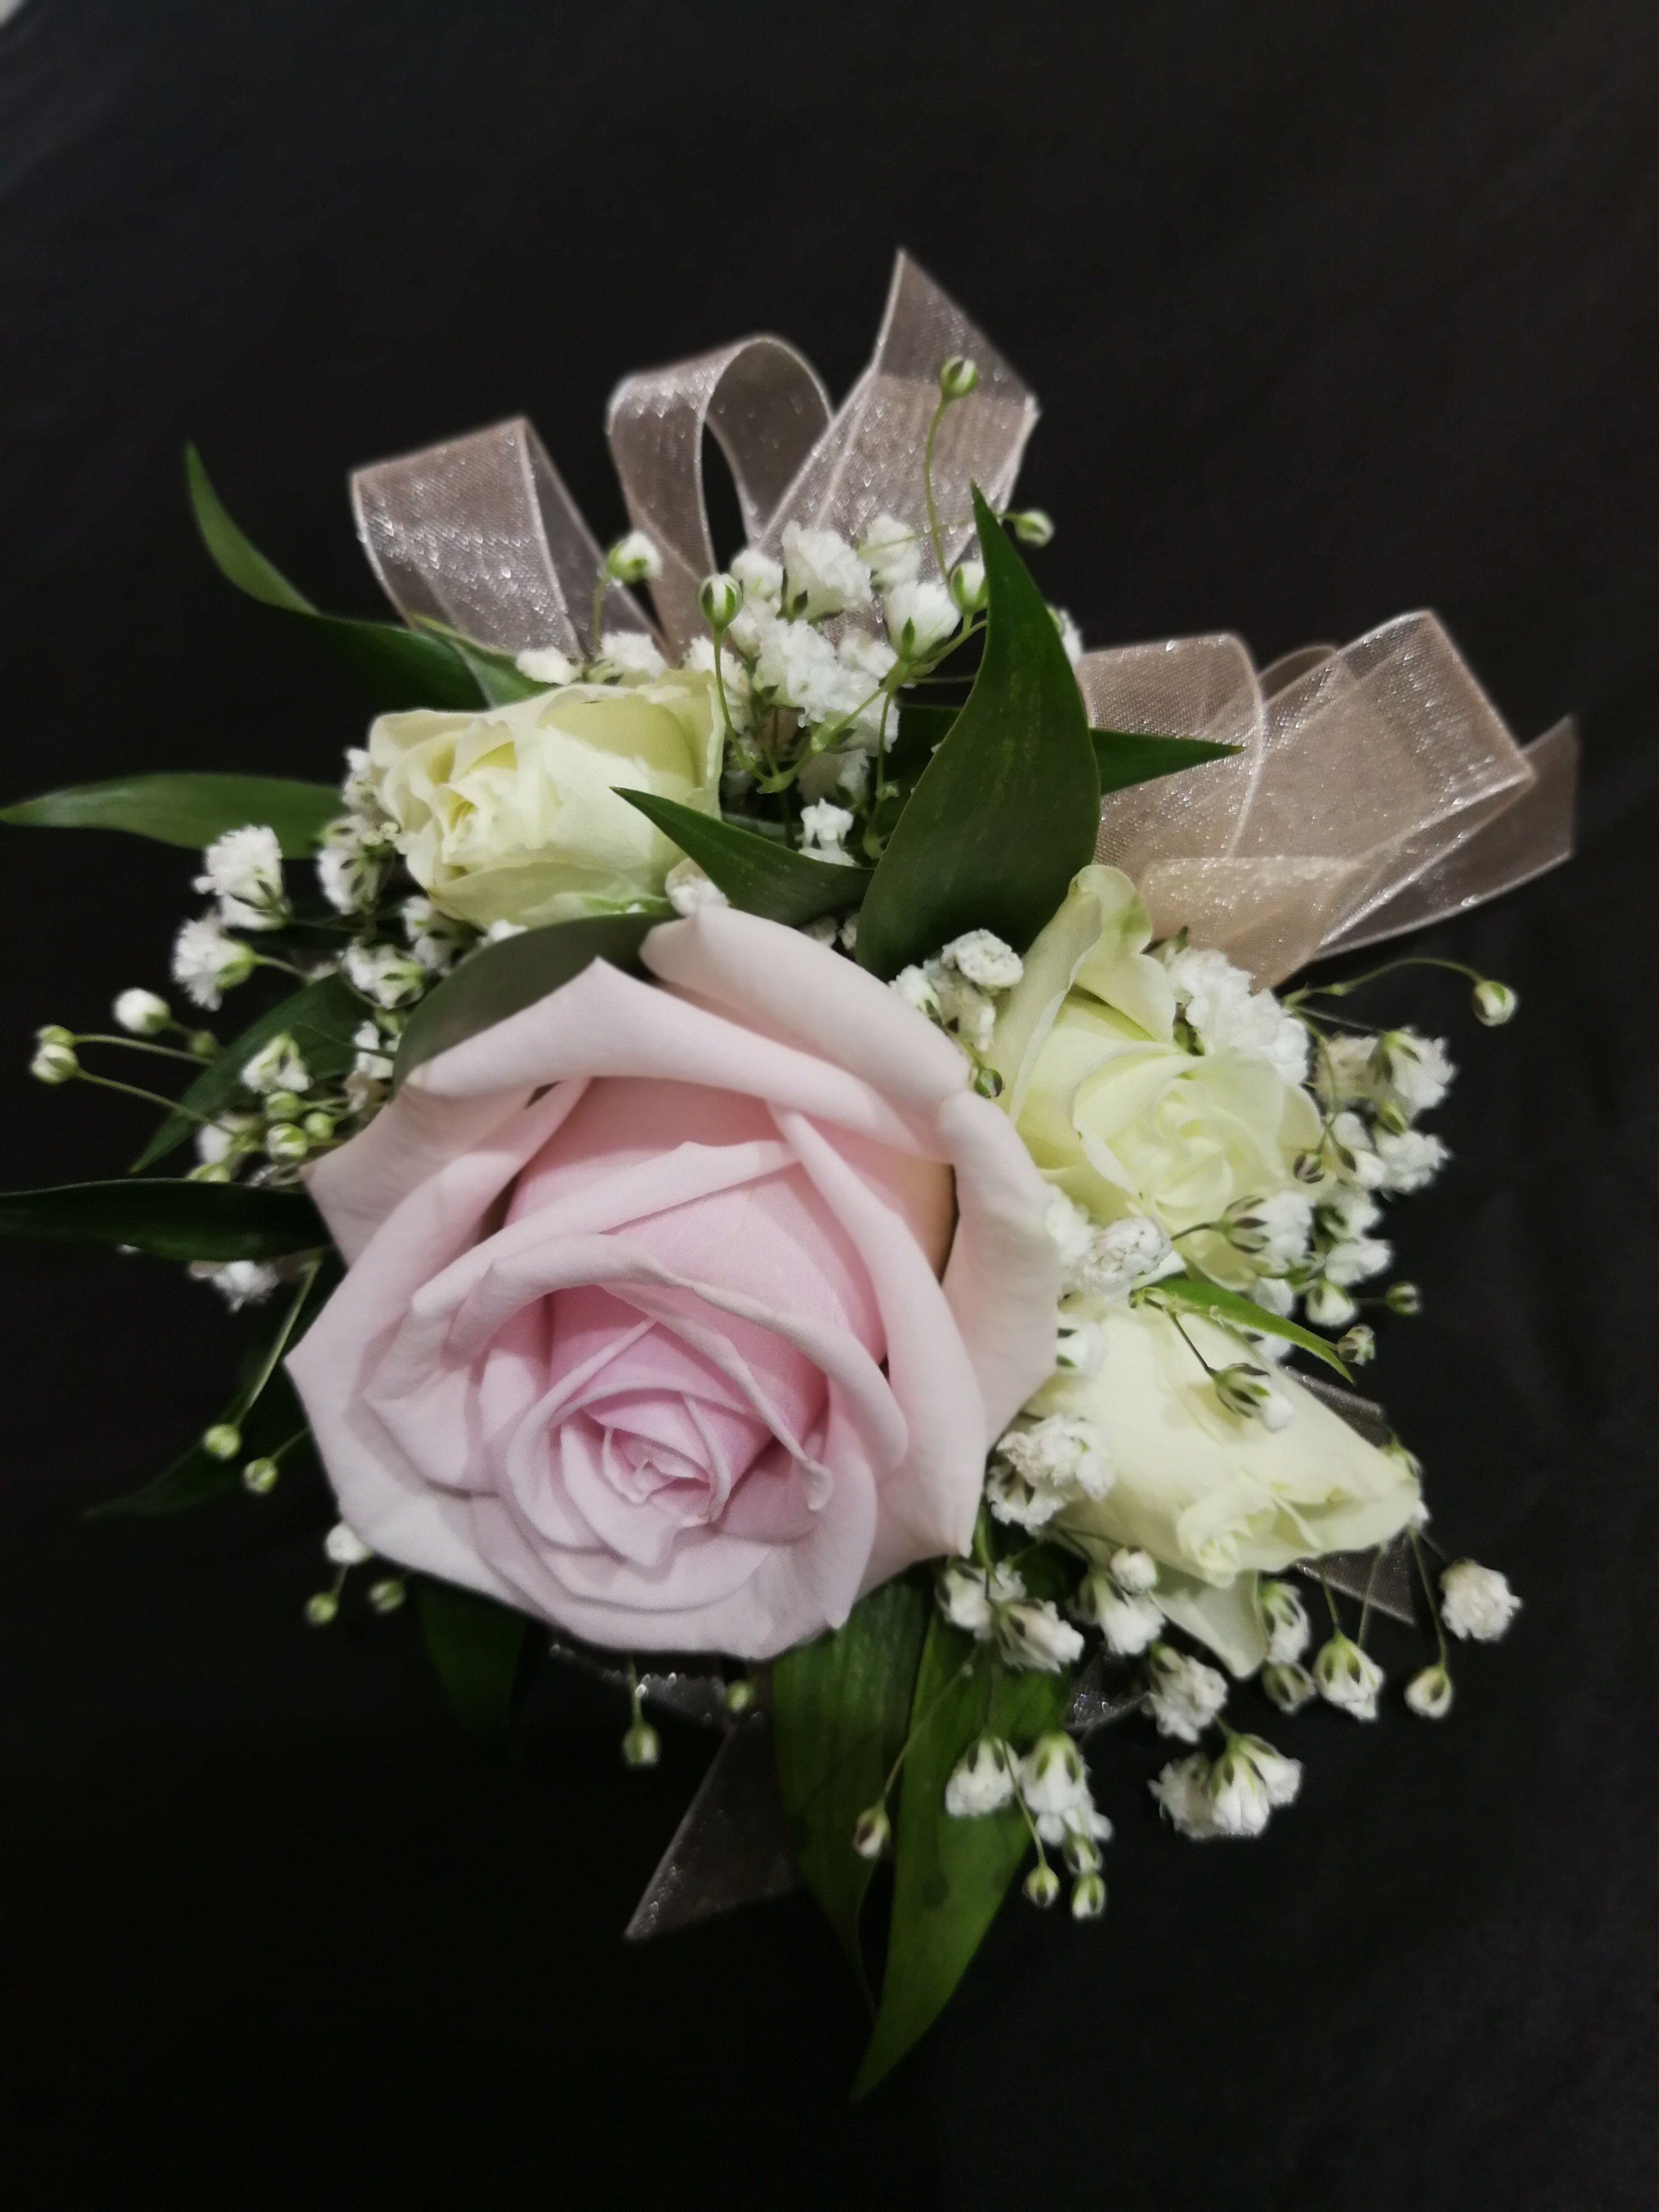 Wrist Corsage - L Pink Rose w/ White Accents